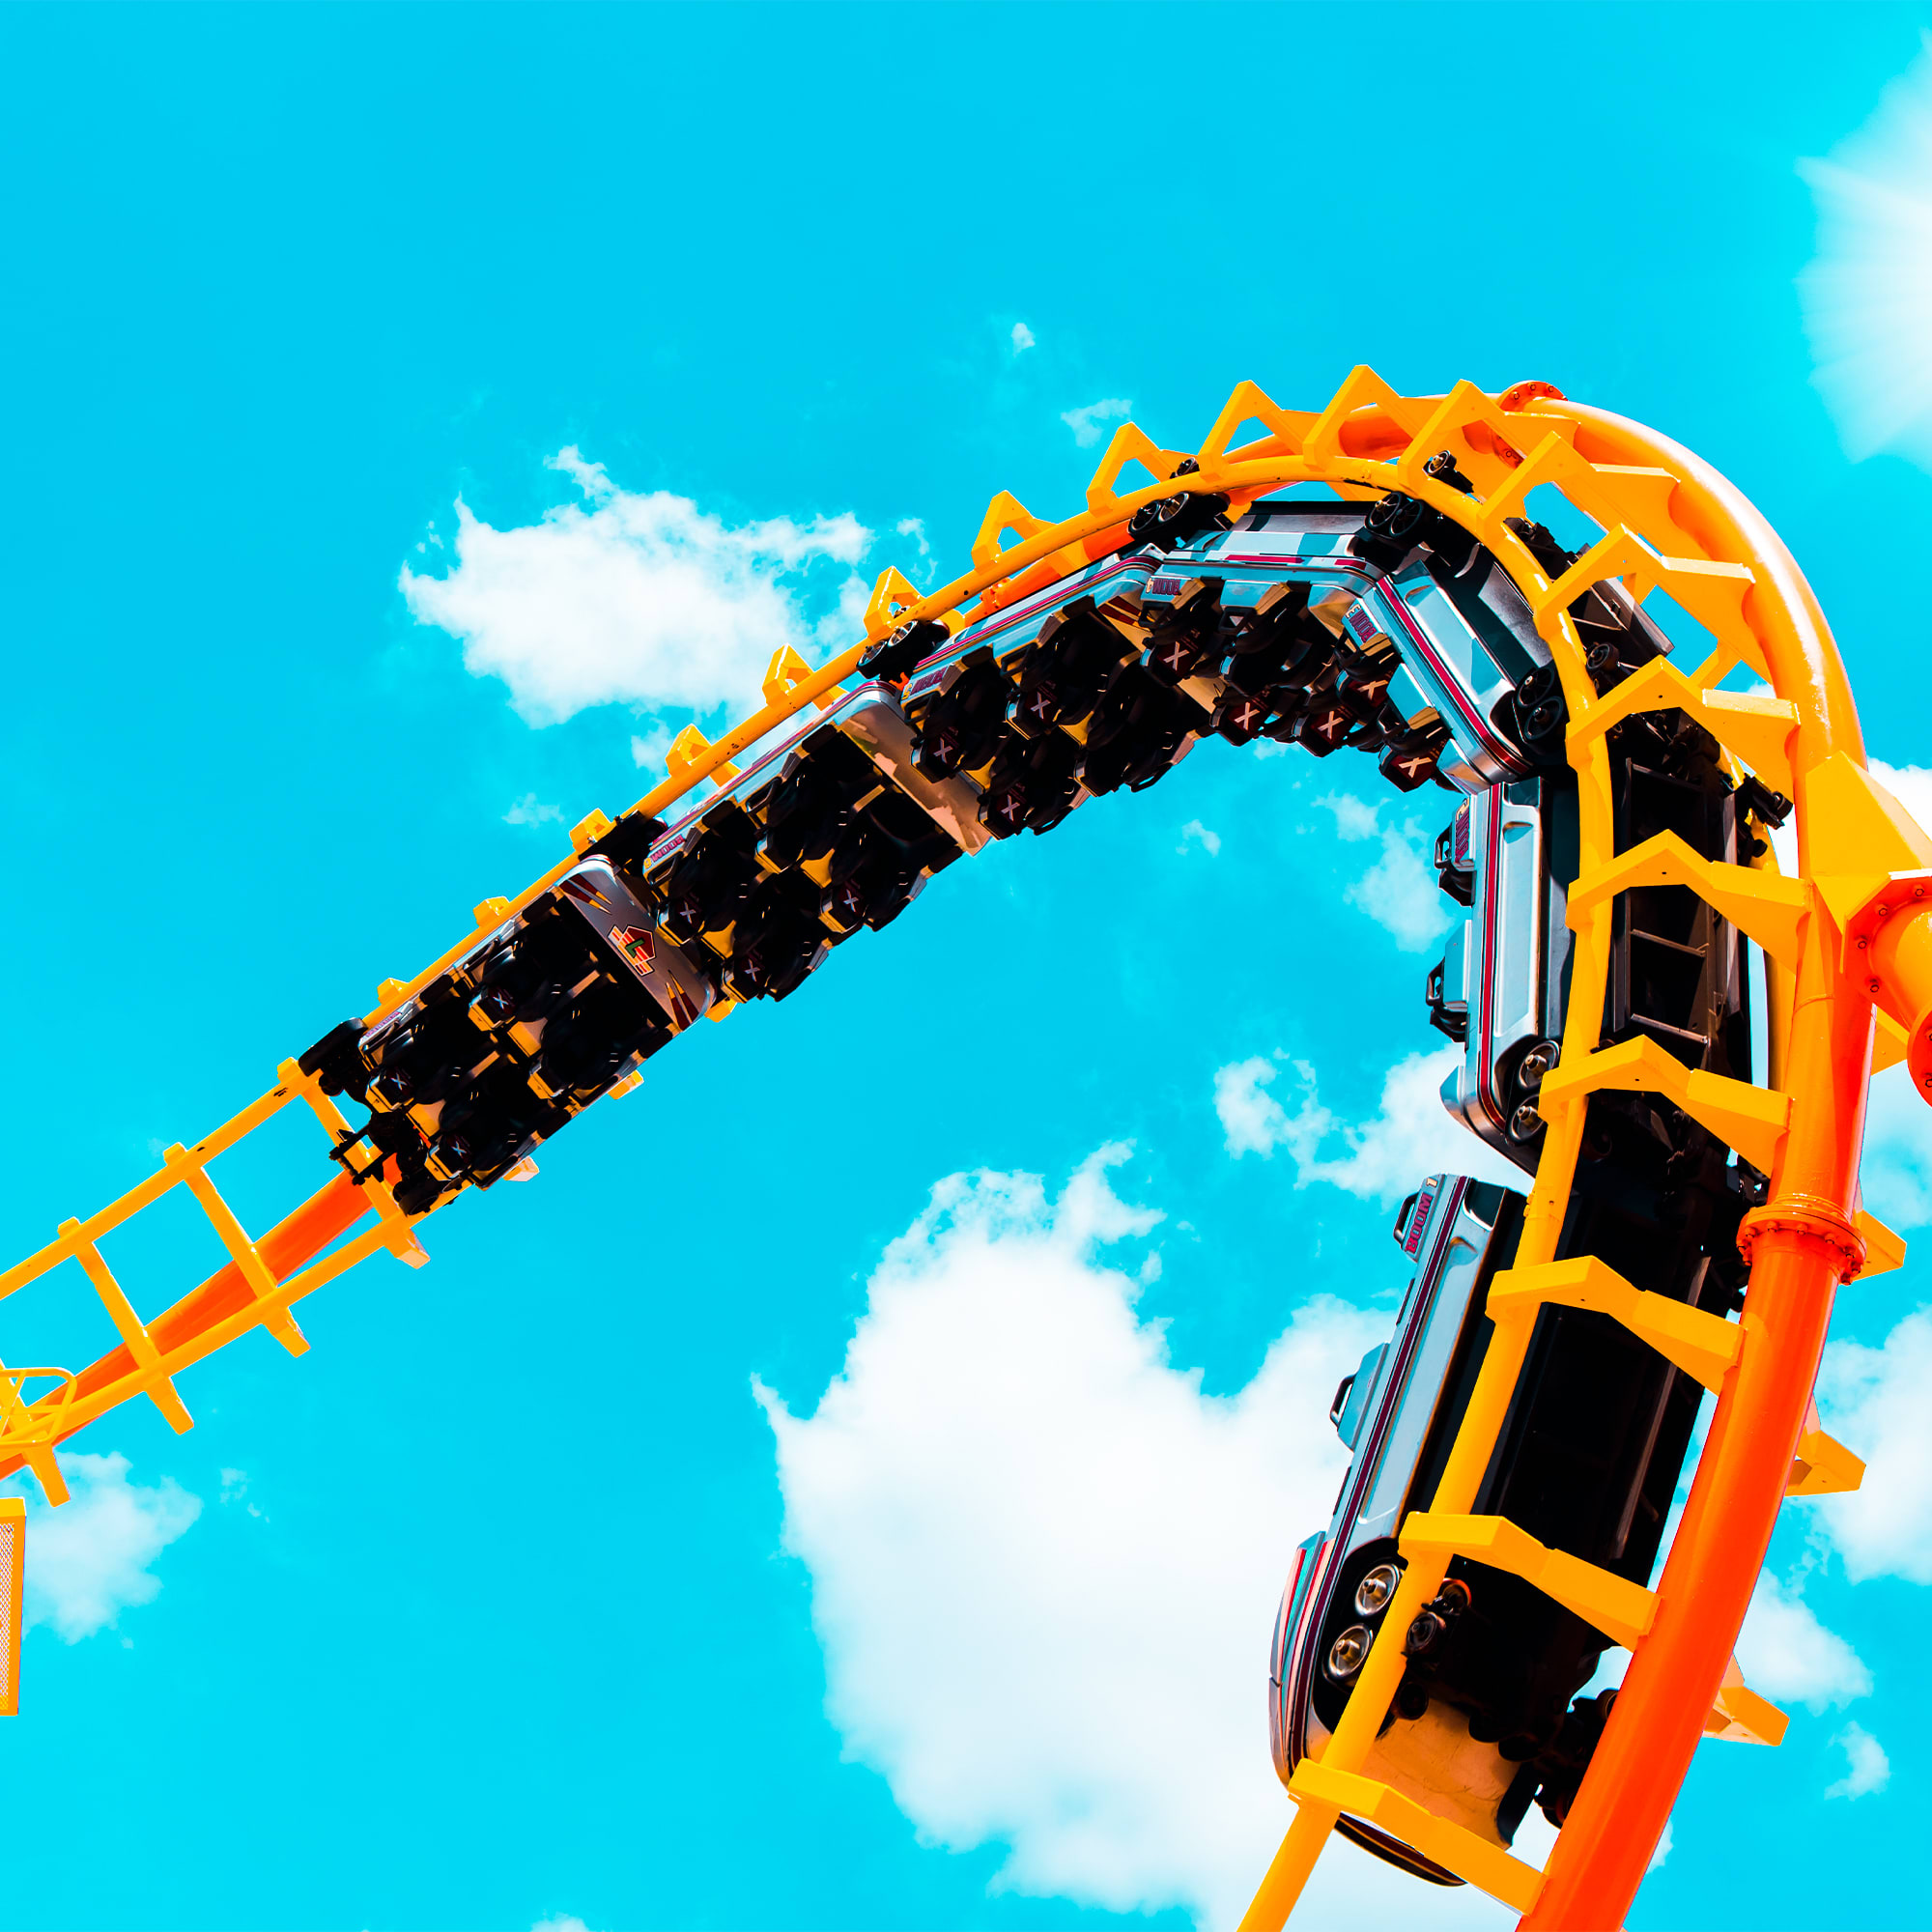 Looking for thrills and excitement? Explore Madrid's top theme parks and amusement parks for a fun-filled day with family and friends. Experience heart-pumping rides, captivating attractions, and incredible shows - there's never a dull moment!